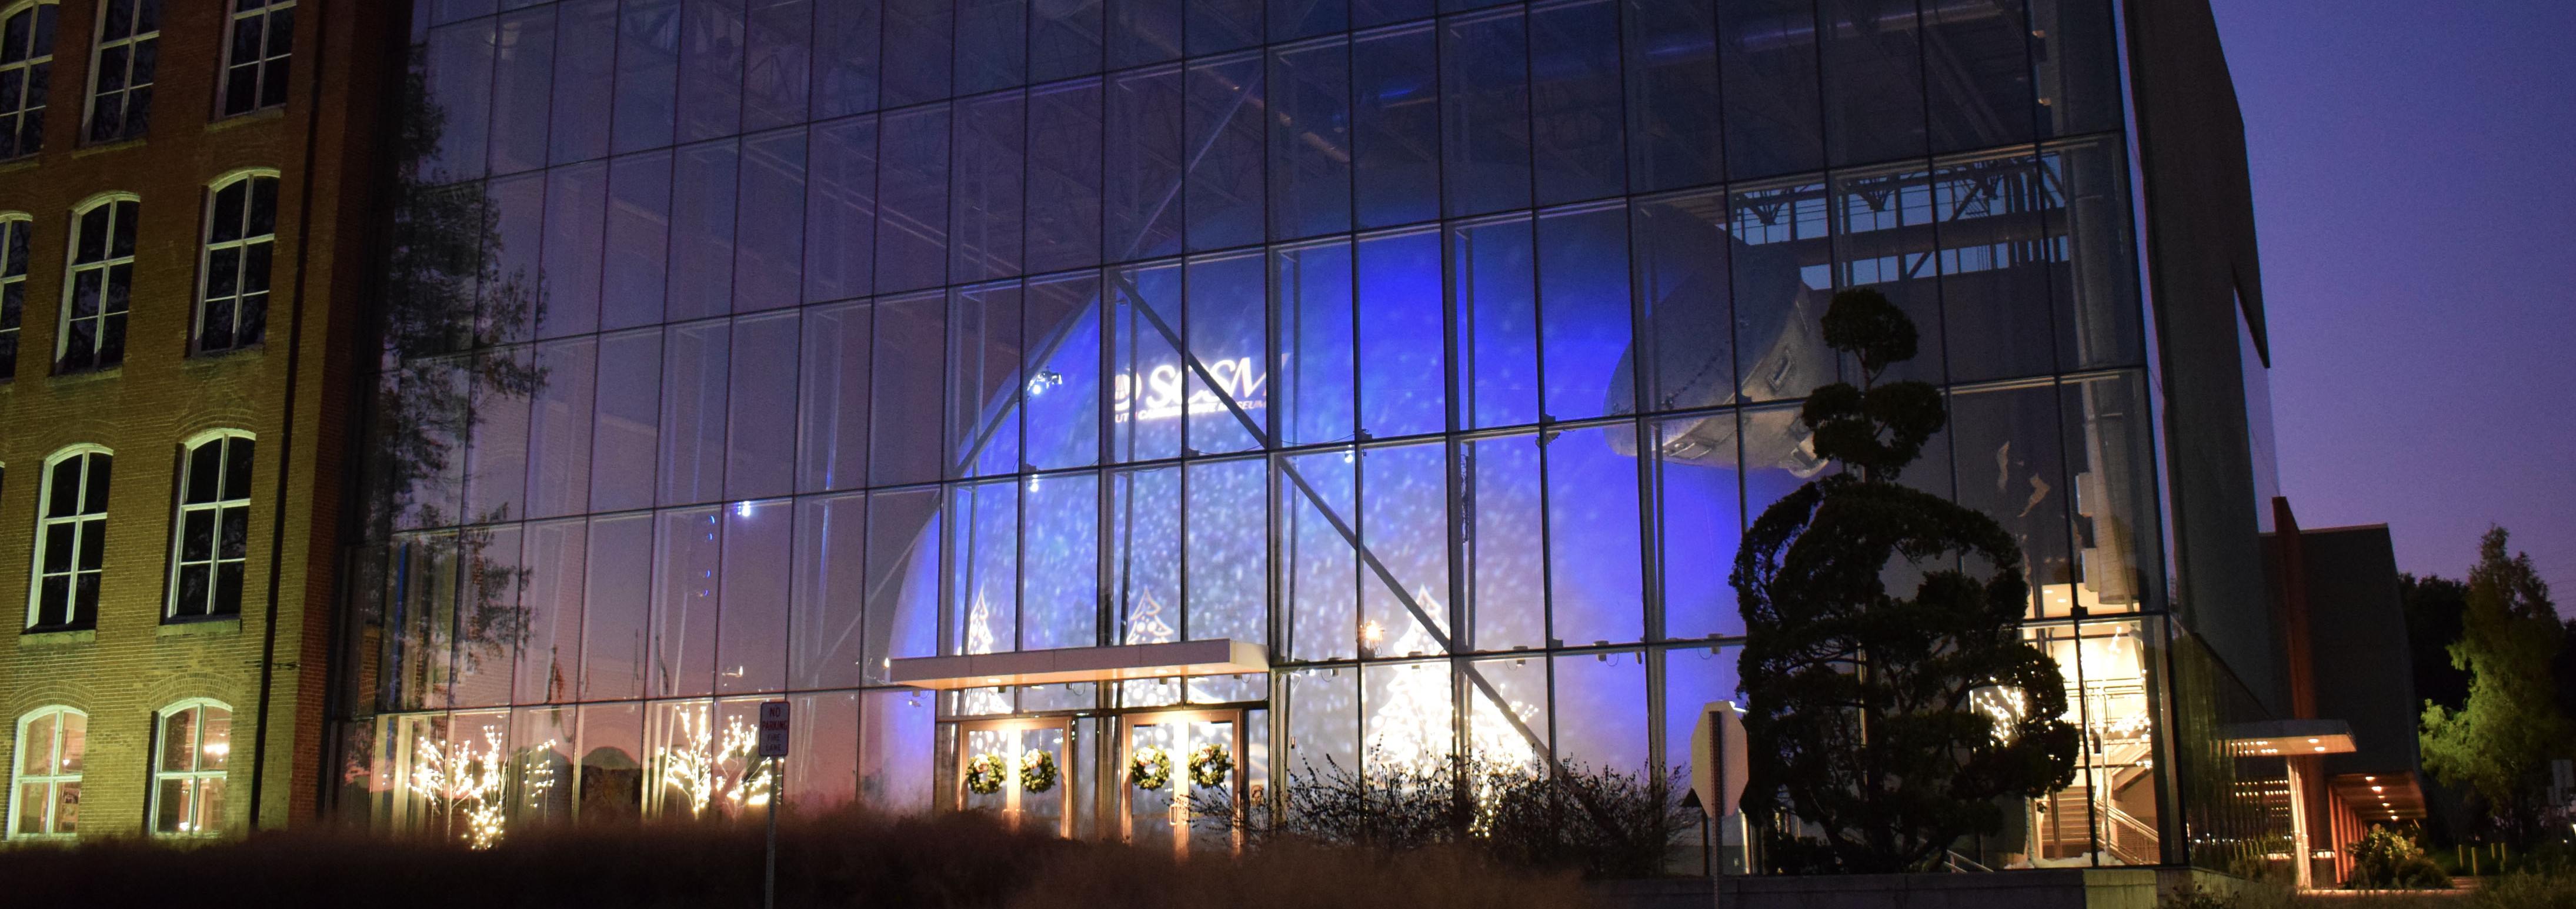 Four story building with glass walls with large dome inside. Dome is lit up in blue and white with snowflakes and the museum logo on the side.